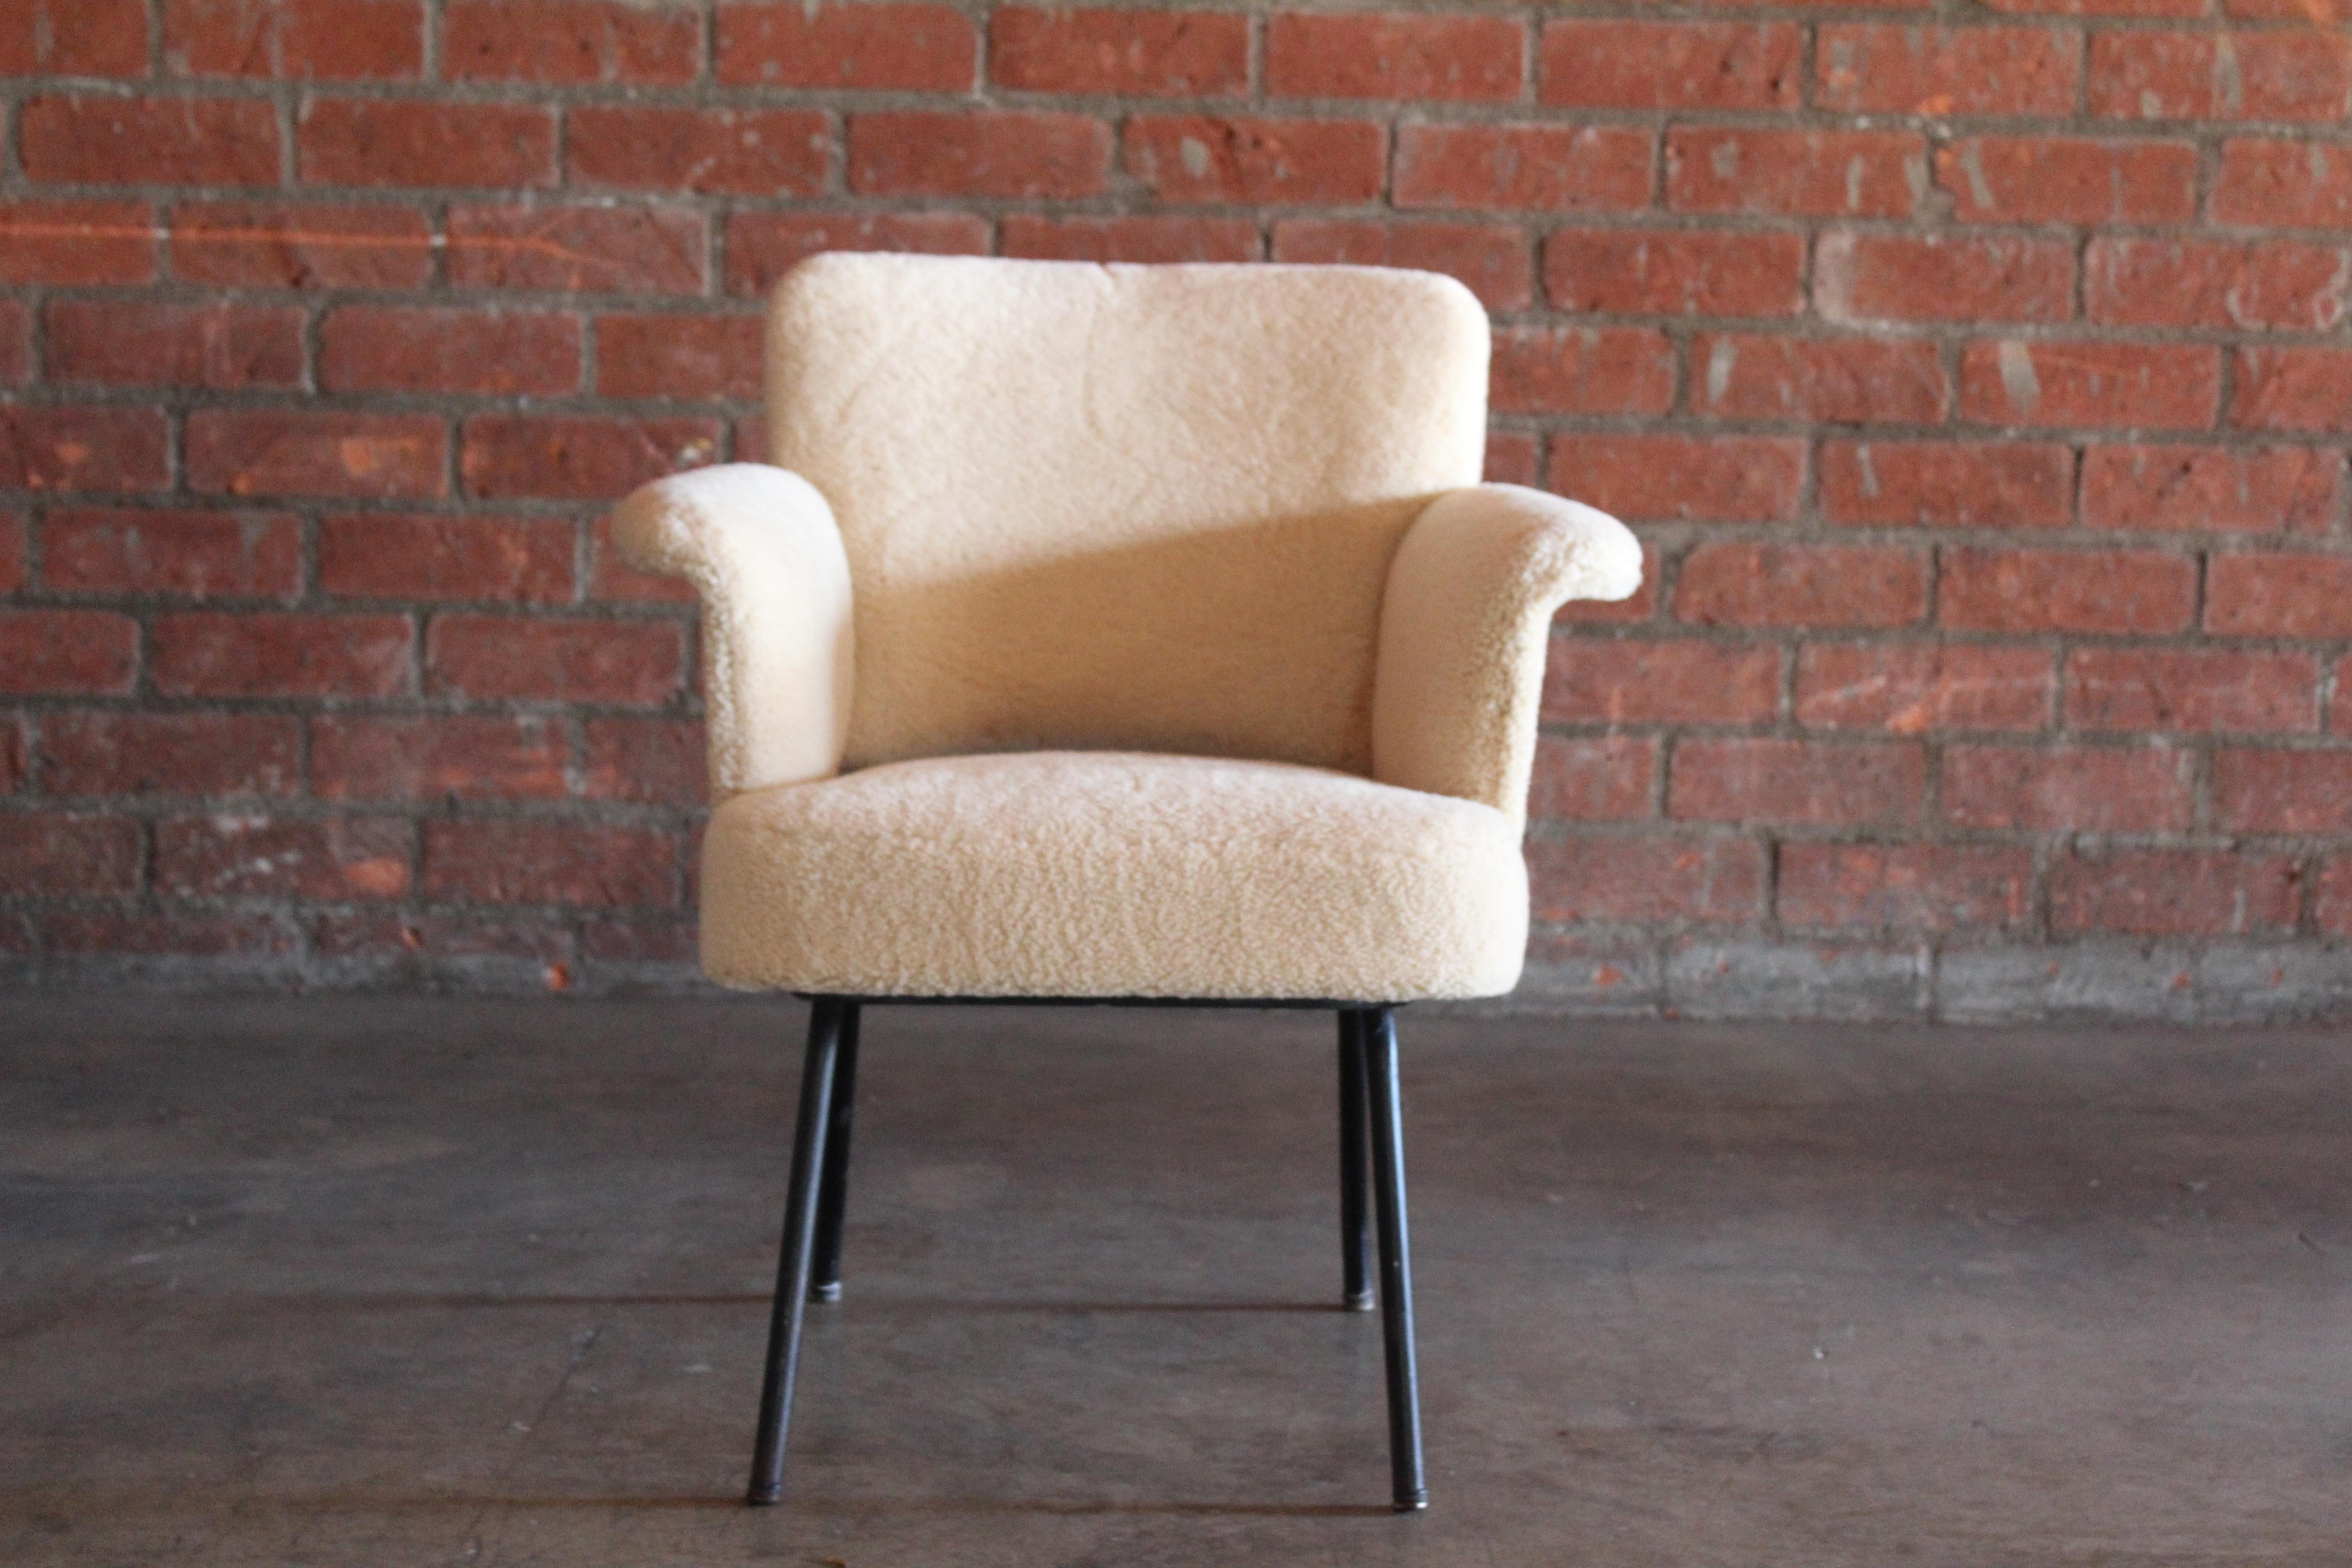 A vintage mid-century armchair by Pierre Guariche, France, 1950s. Newly upholstered in sheepskin. The metal legs are in their original condition with a nice patina. We have a pair, sold individually. This chair is two inches lower than the other